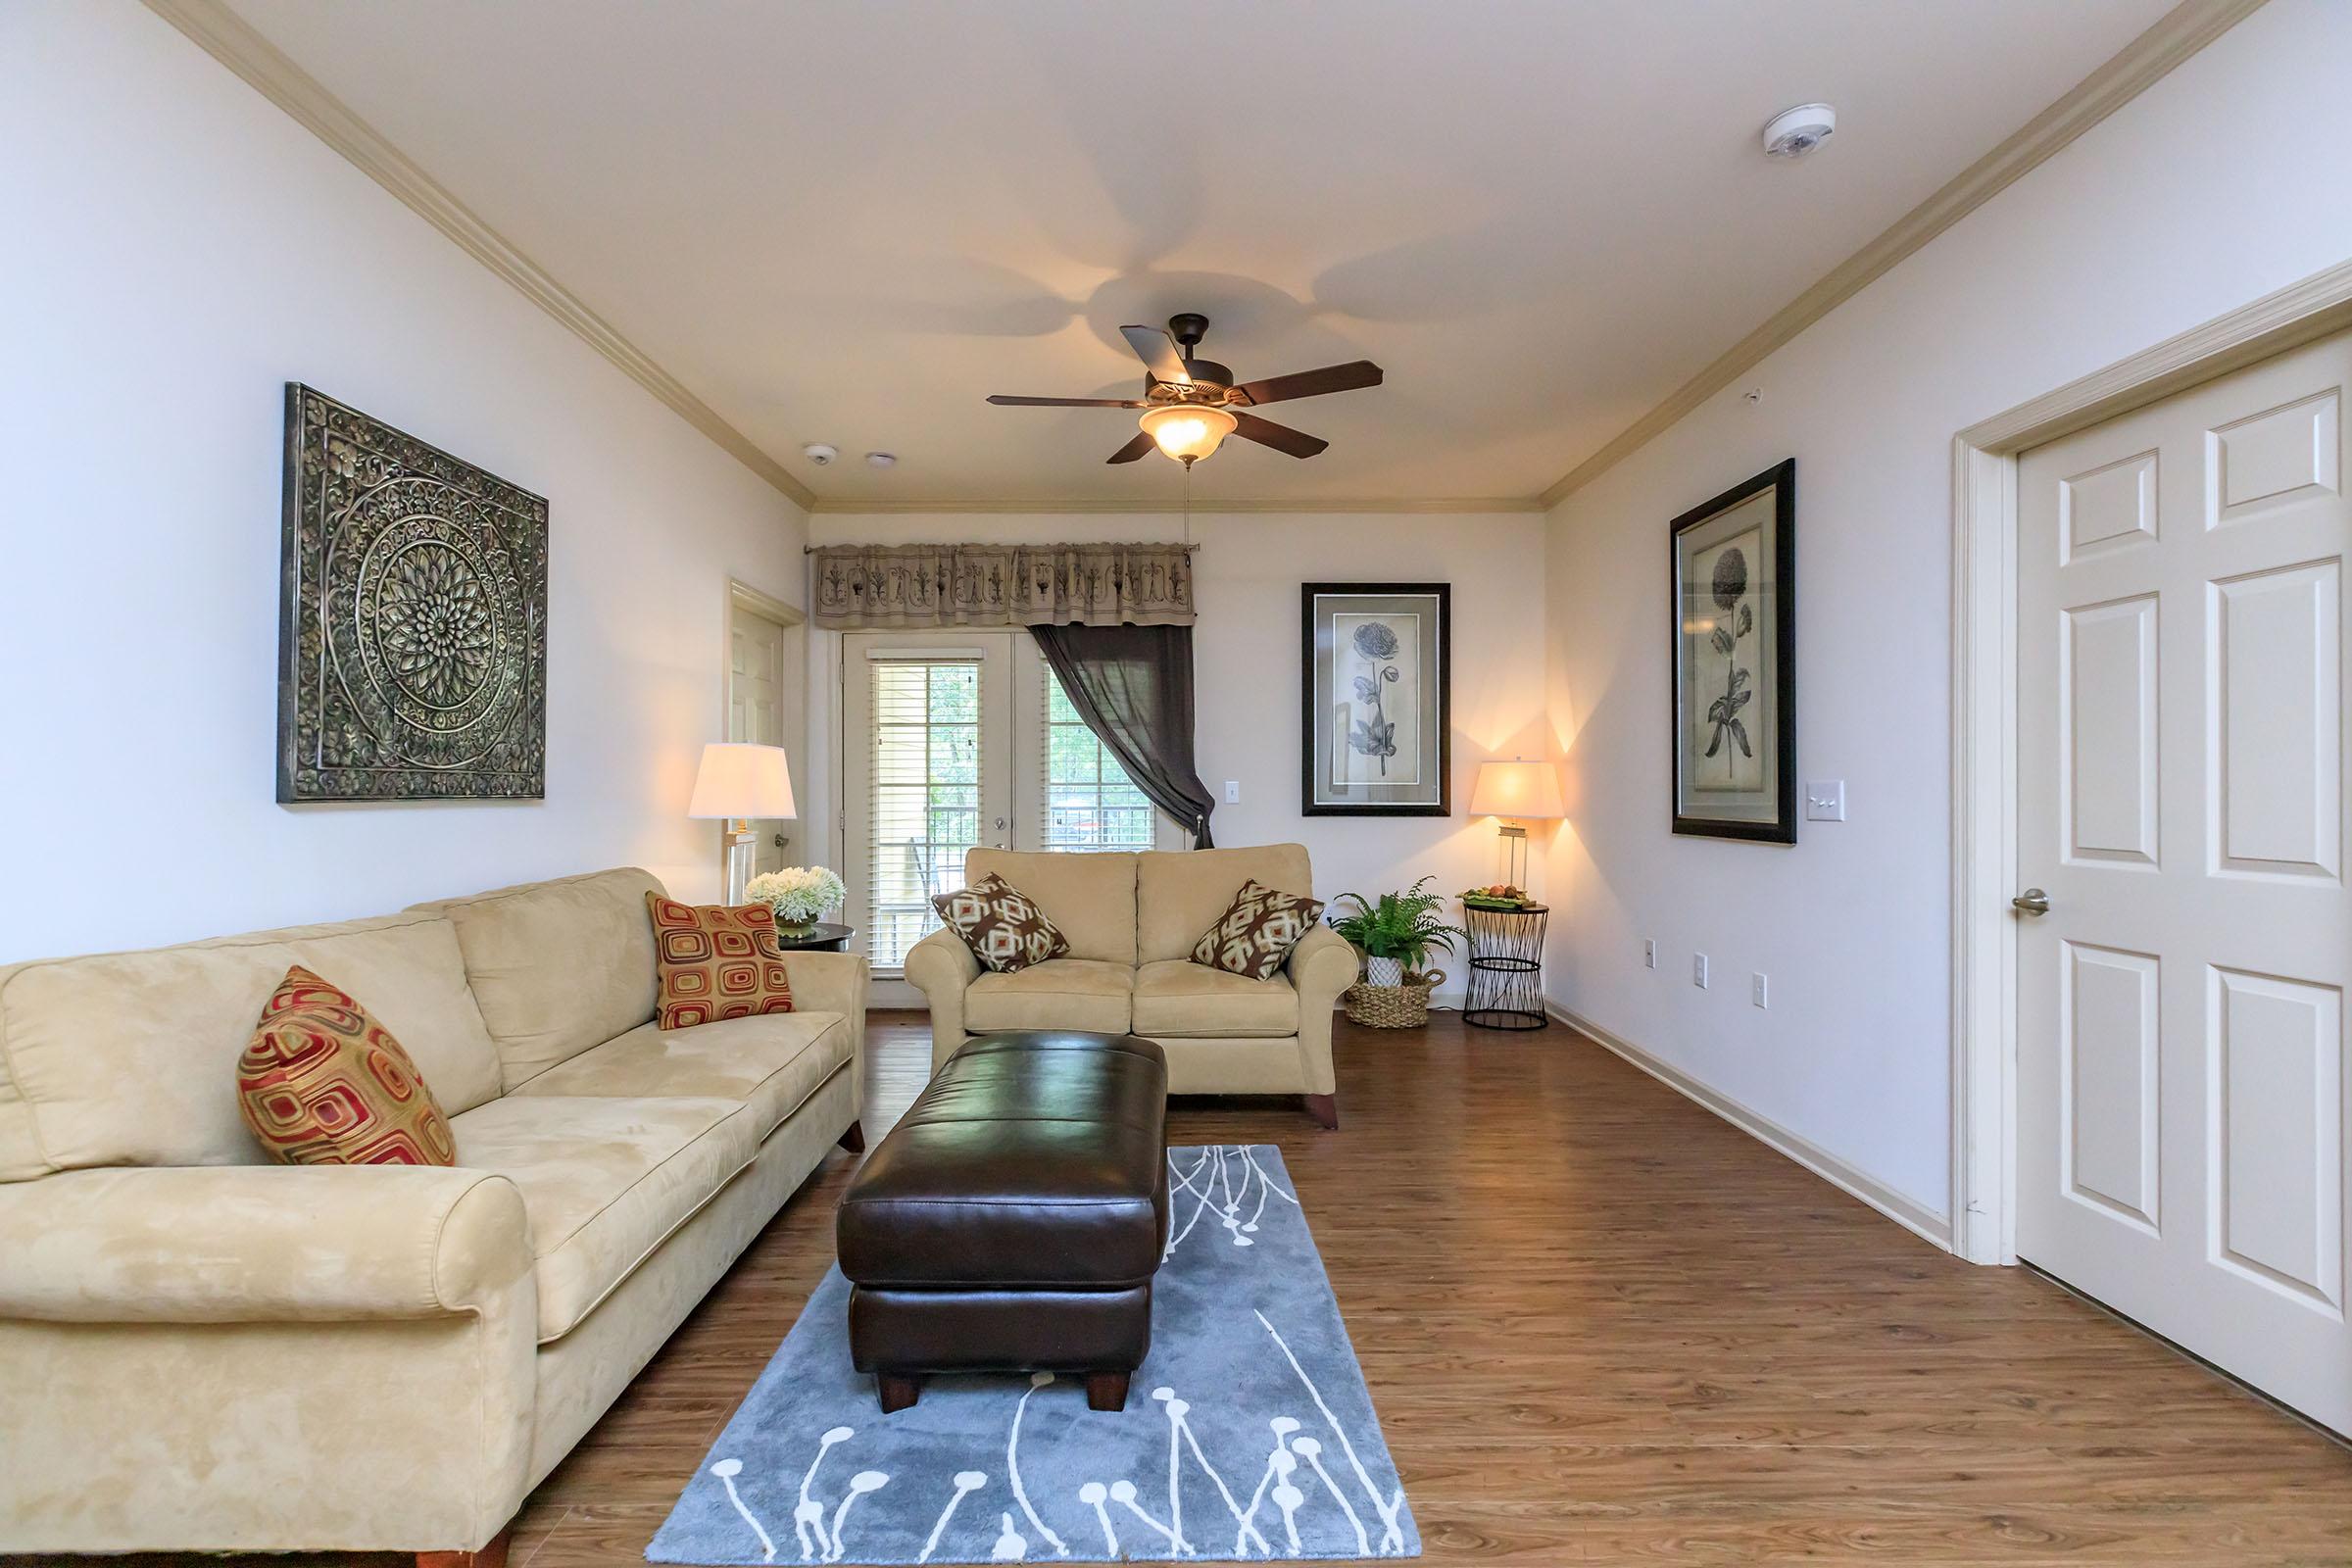 ENTICING INTERIORS FOR RENT AT ABITA VIEW APARTMENT HOMES